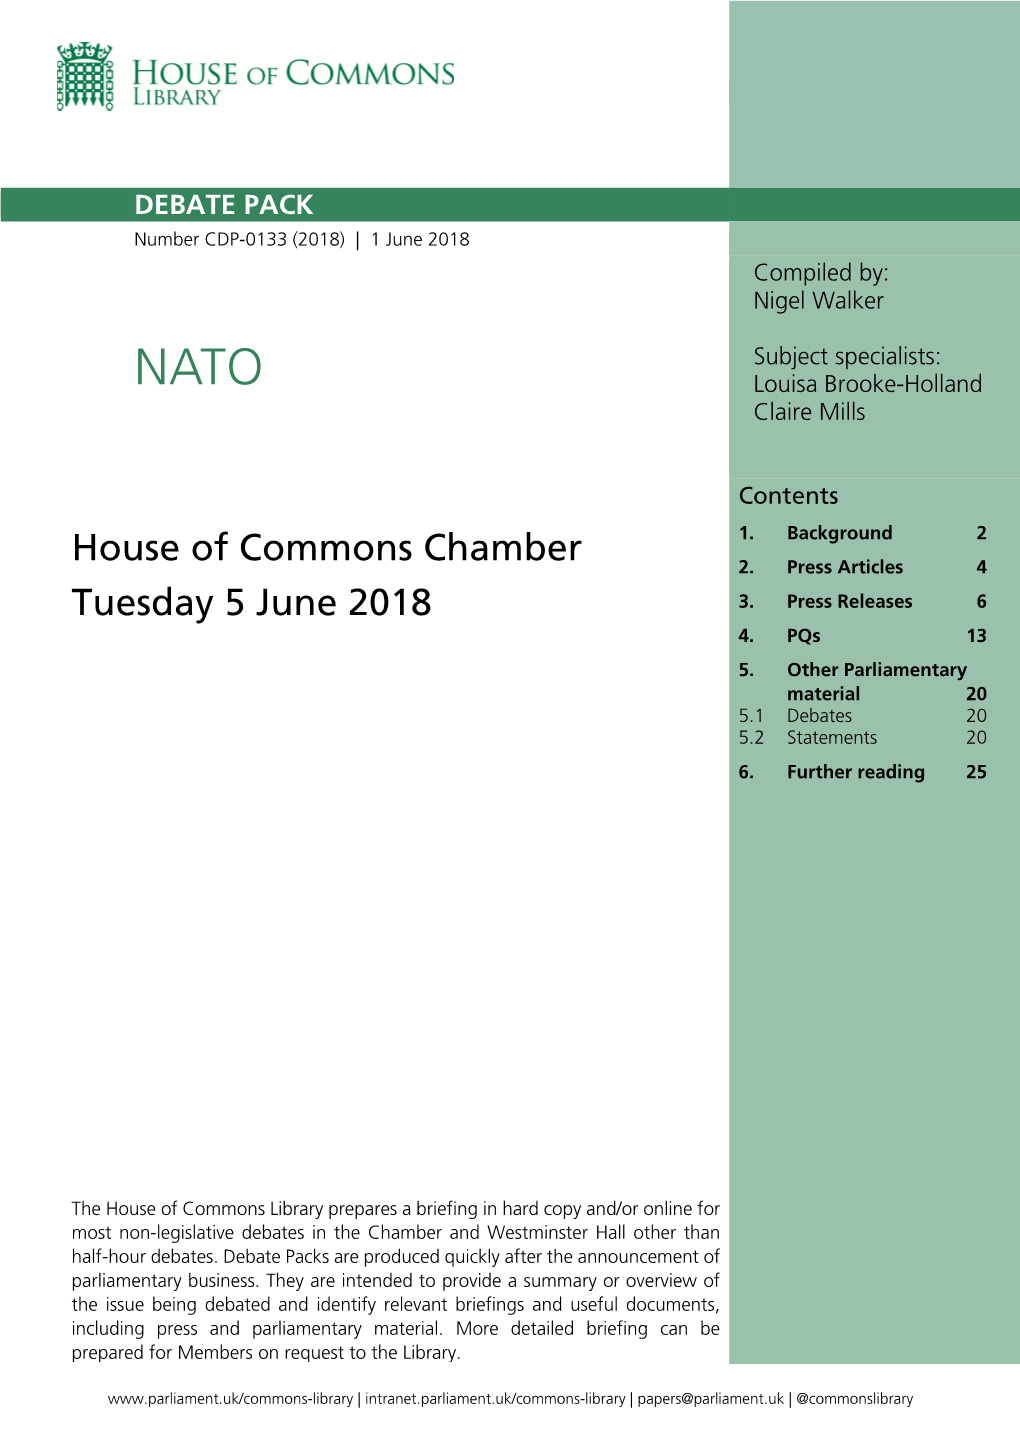 House of Commons Chamber Tuesday 5 June 2018